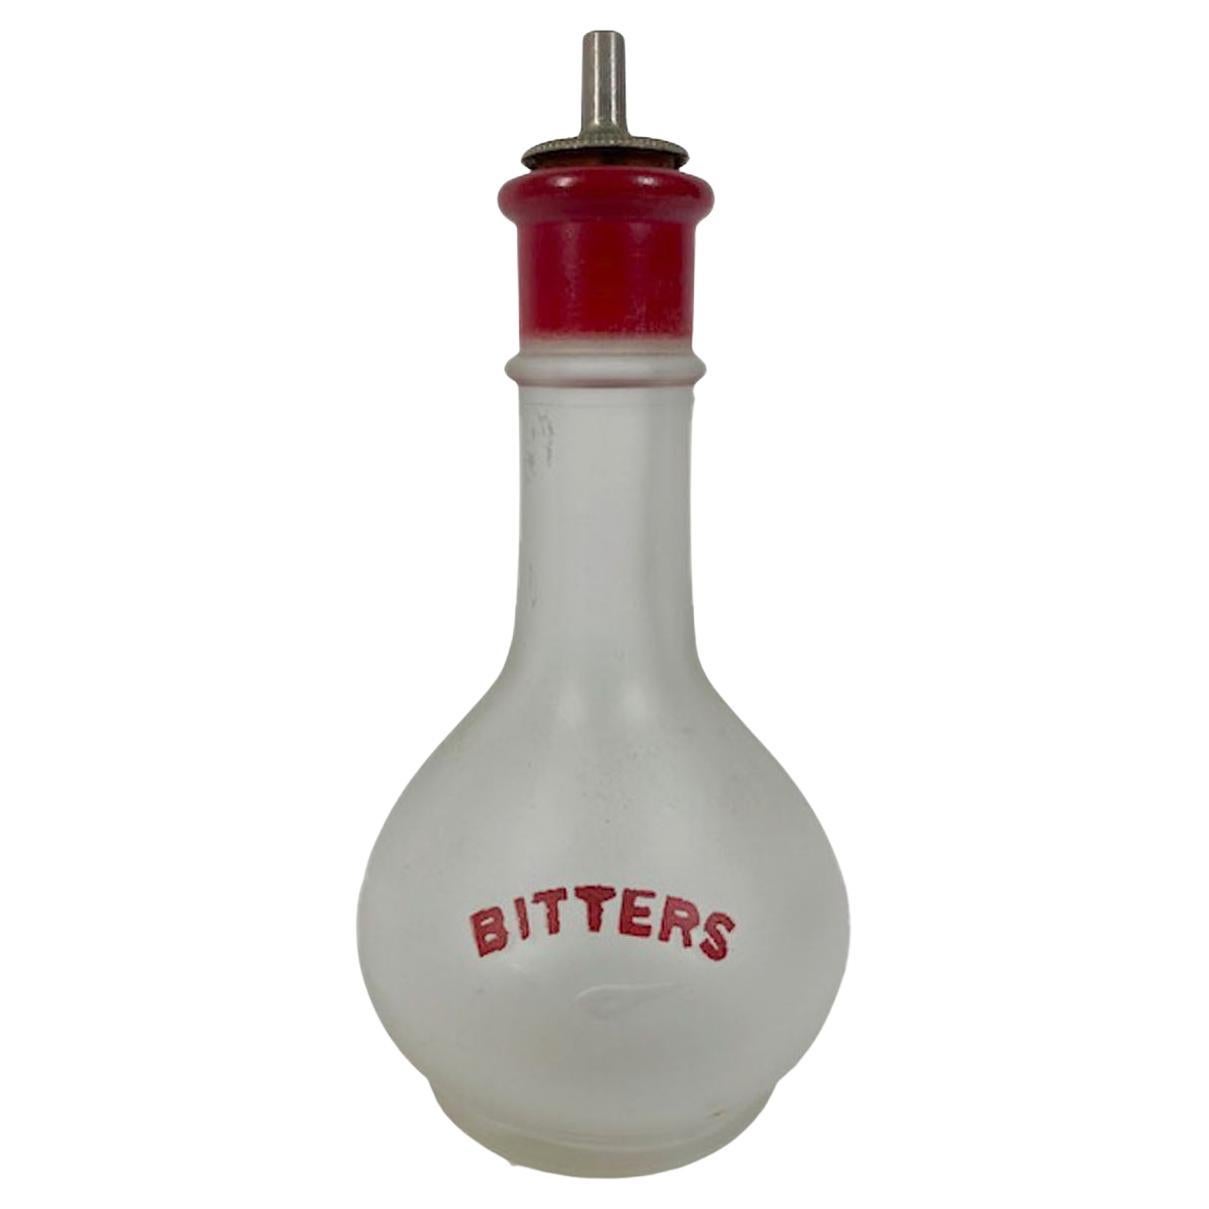 Hazel-Atlas Frosted Bitters Bottle with "Bitters" and Collar in Red Enamel For Sale